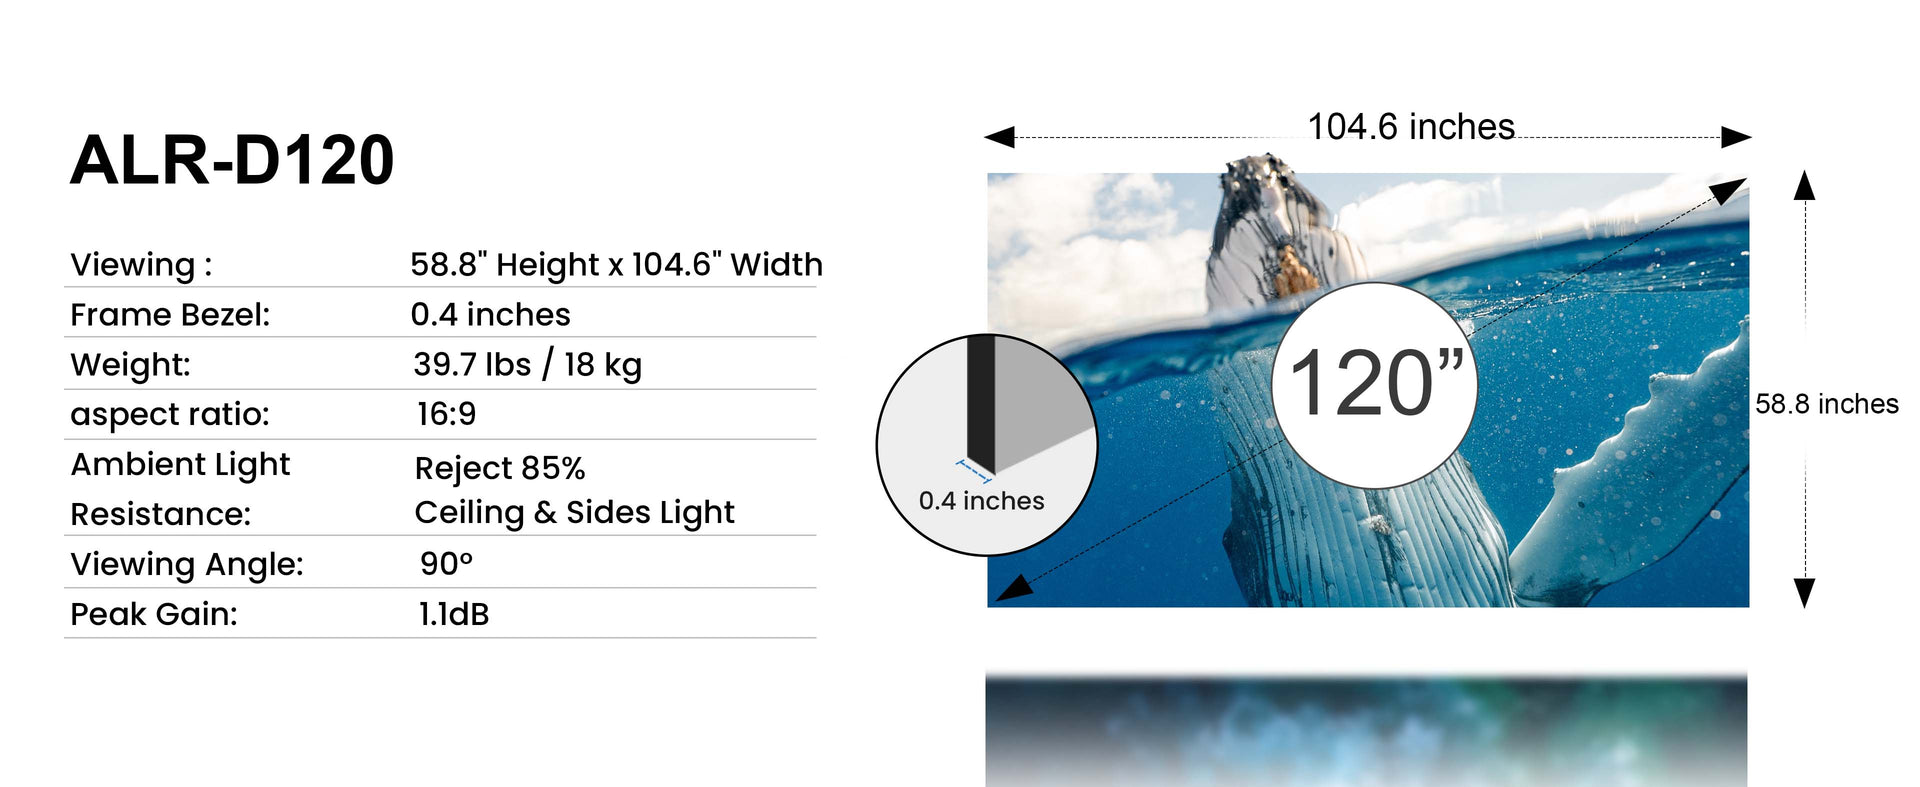 Parametric details of the 120-inch AWOL VISION ALR-D120 Daylight ALR screen, including 1.1 dB peak gain and 85% ambient light rejection.